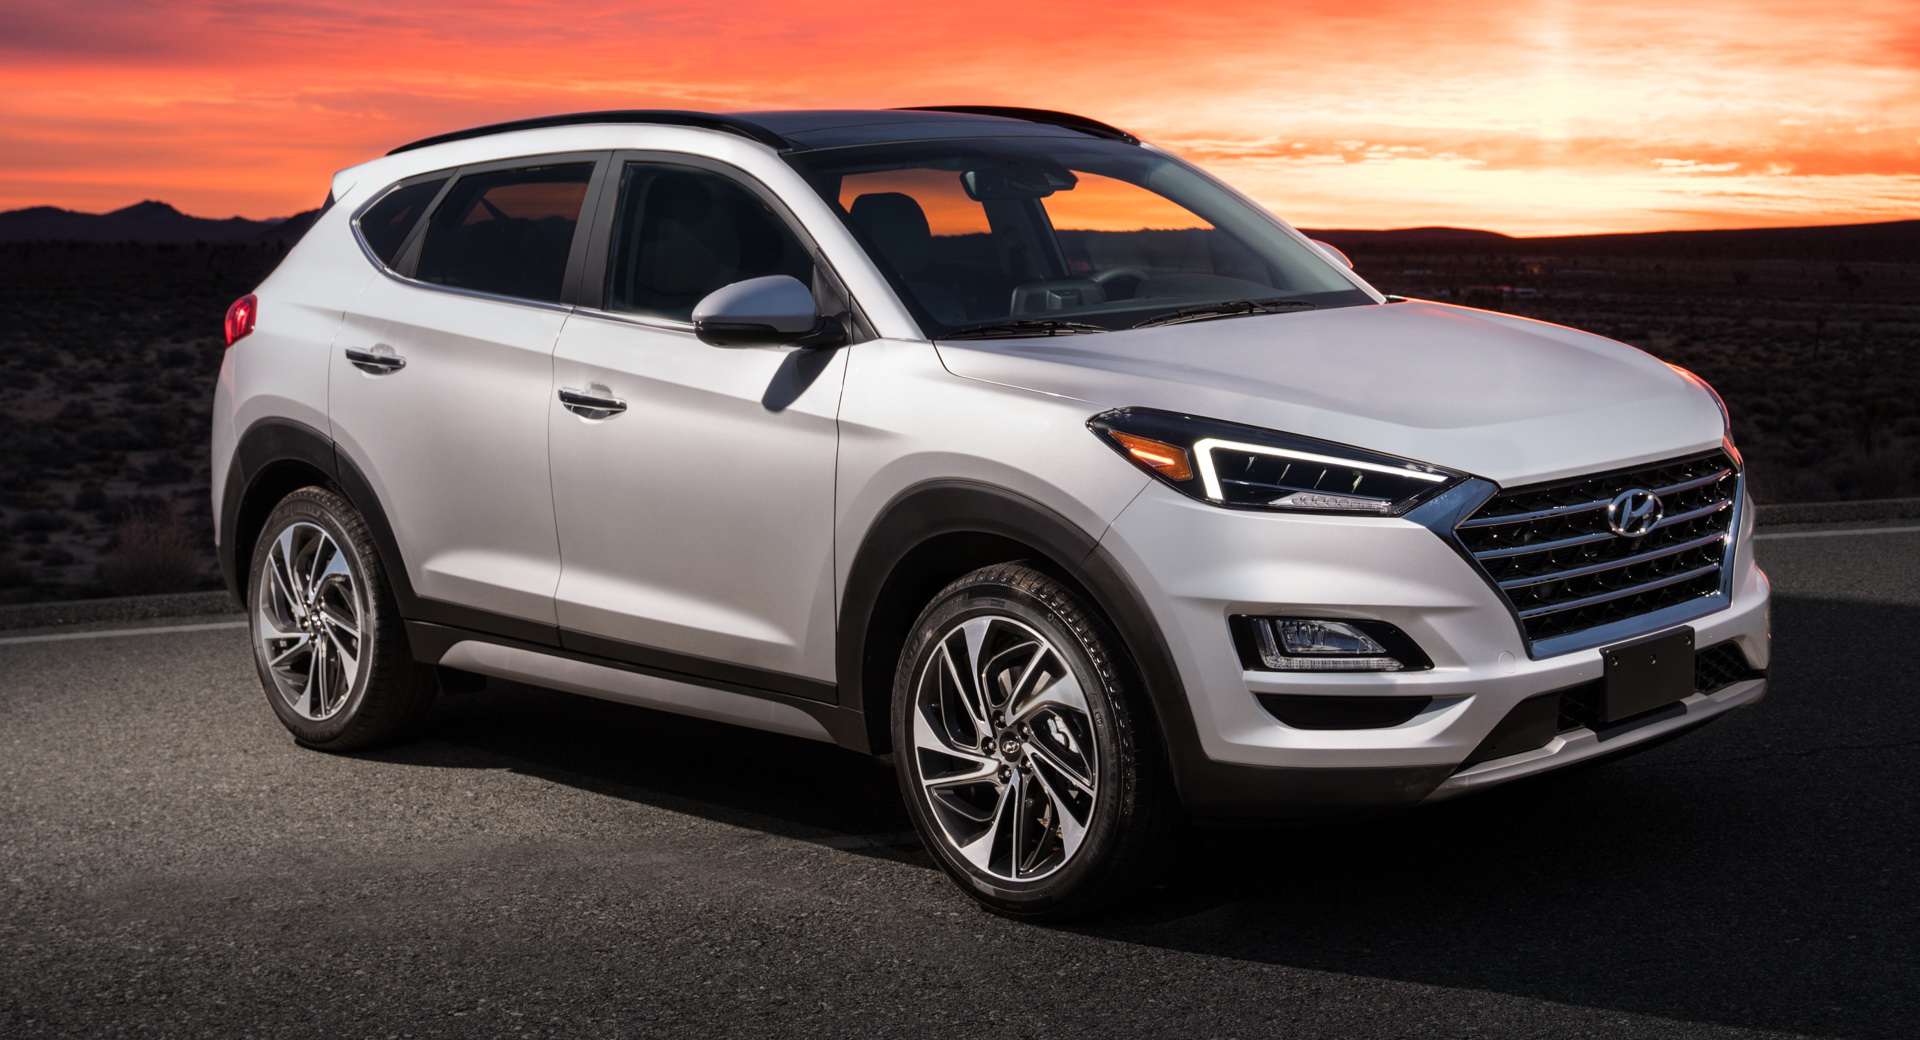 2020MY Hyundai Tucson Gets Refreshed Color Palette And Safety Gear ...